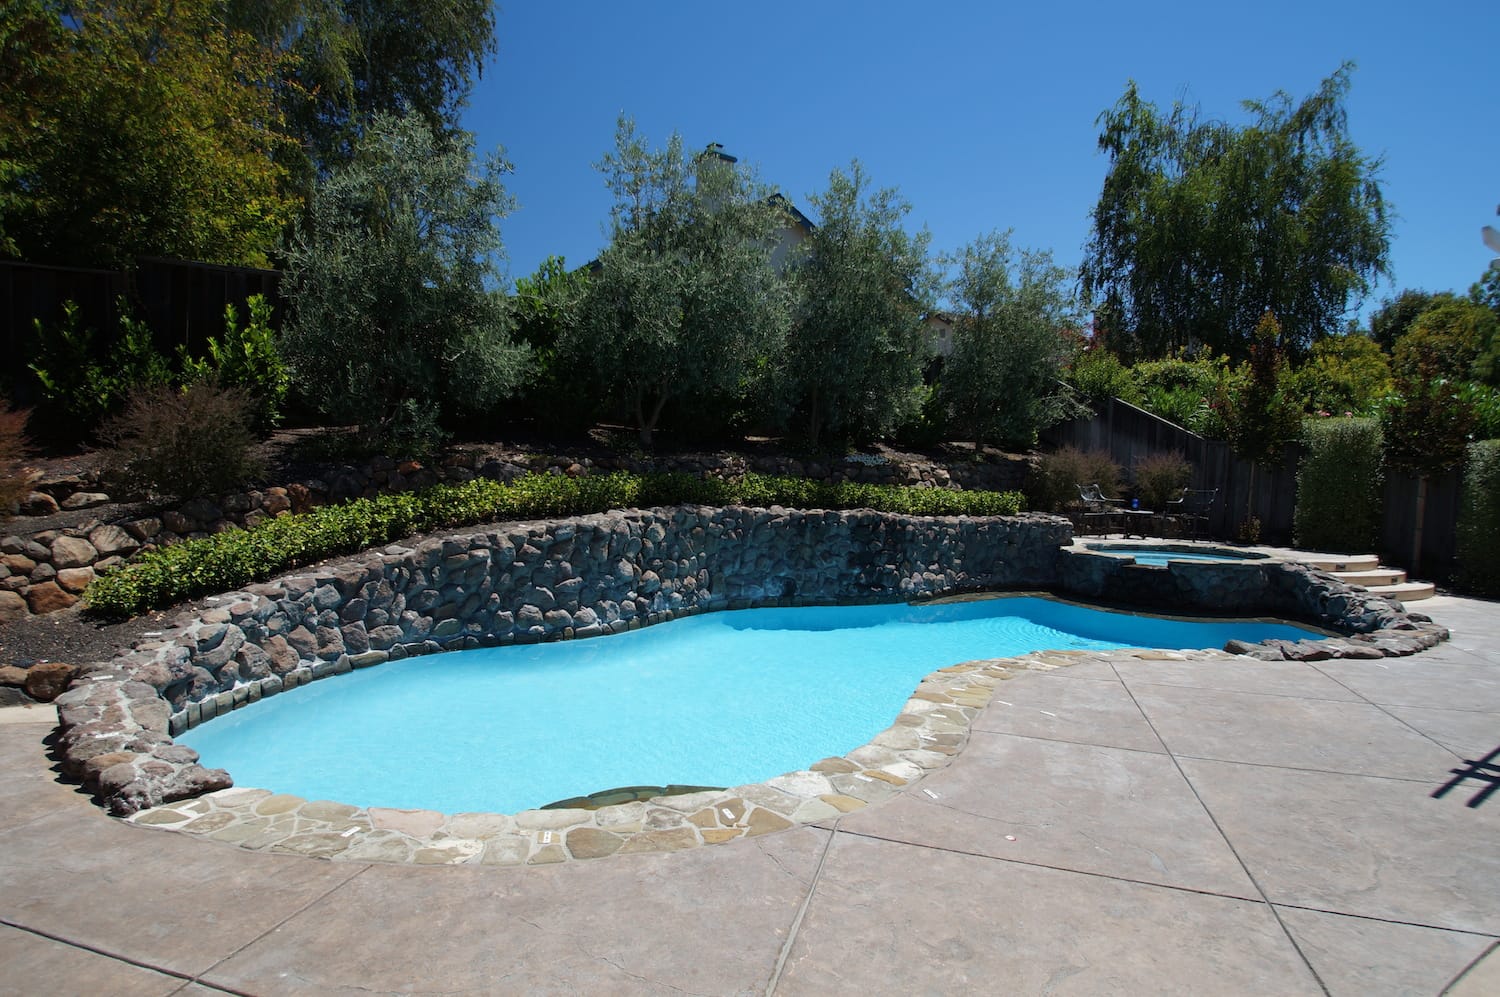 Wet Edge S Blue Pacific Coast, Pacific Coast Landscaping And Pool